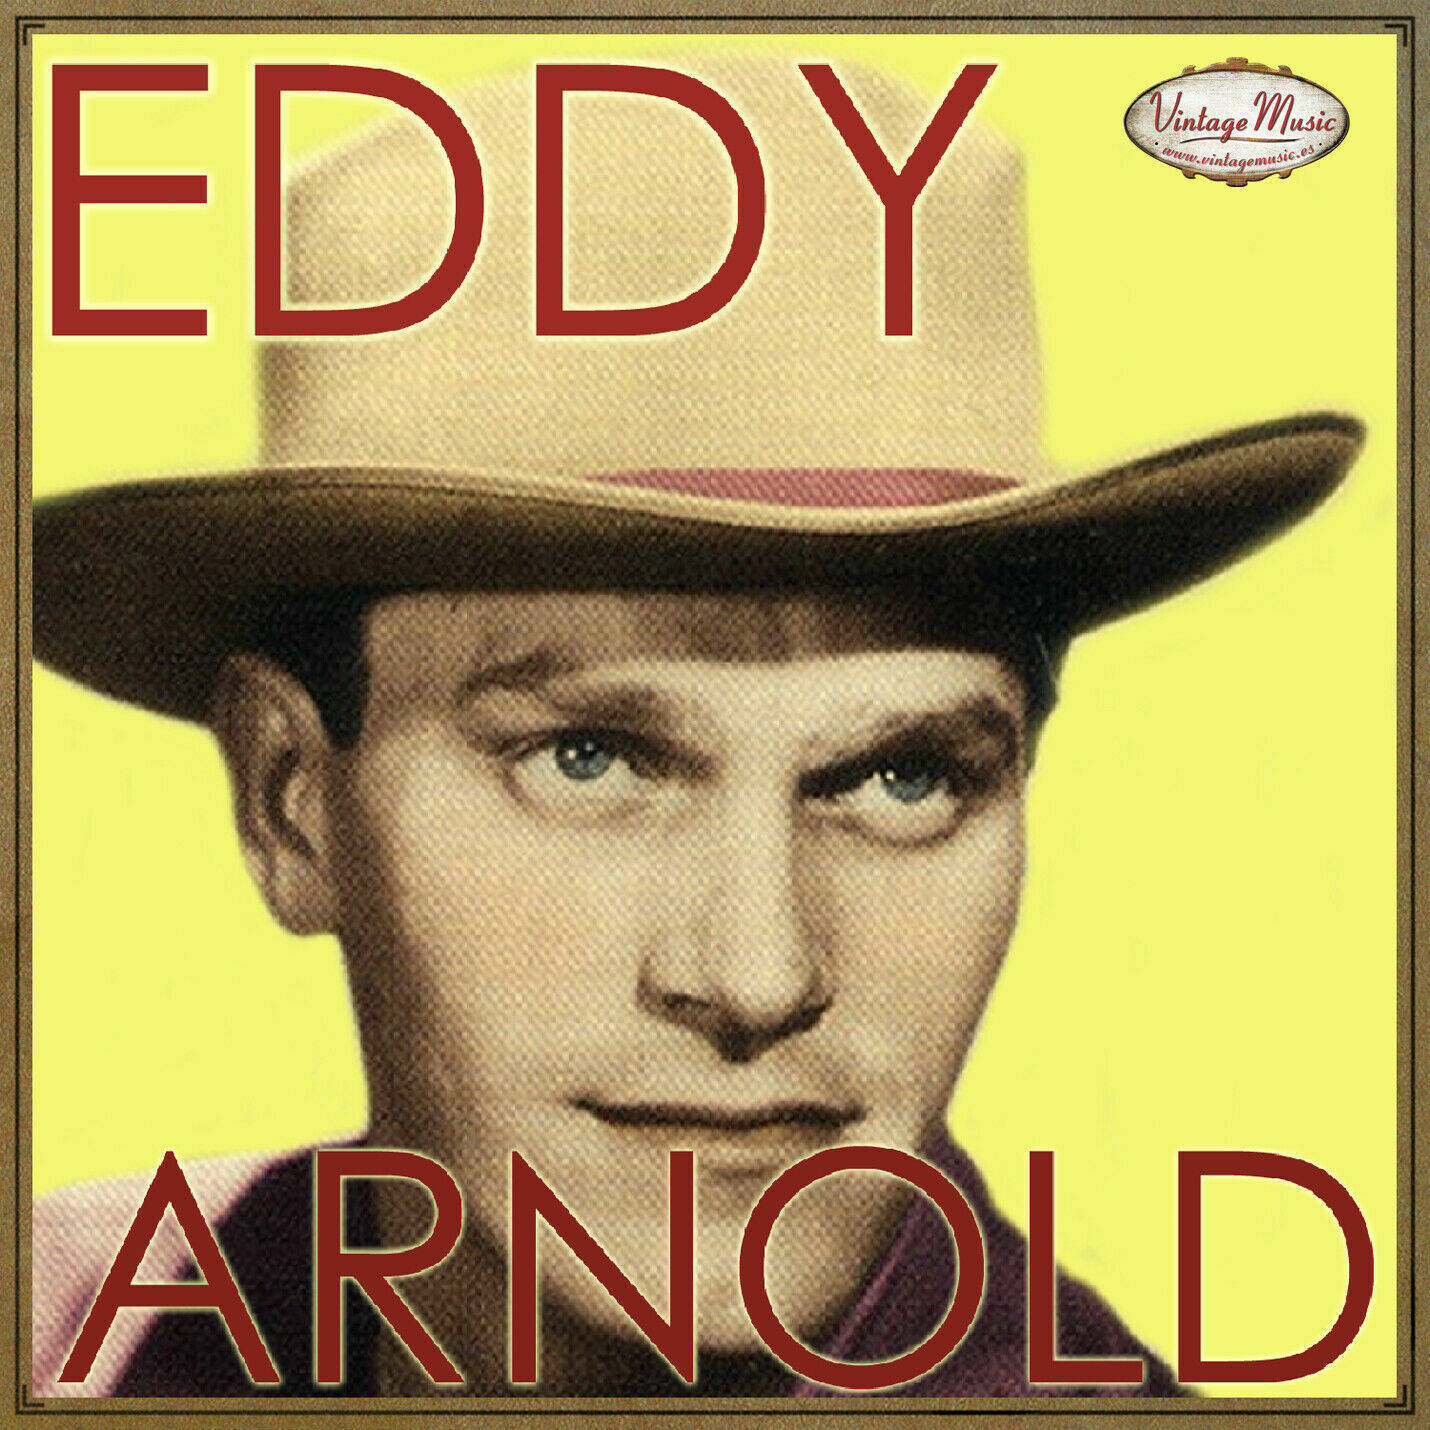 Eddy Arnold Vintage Music Collection Cd Cover Wallpaper